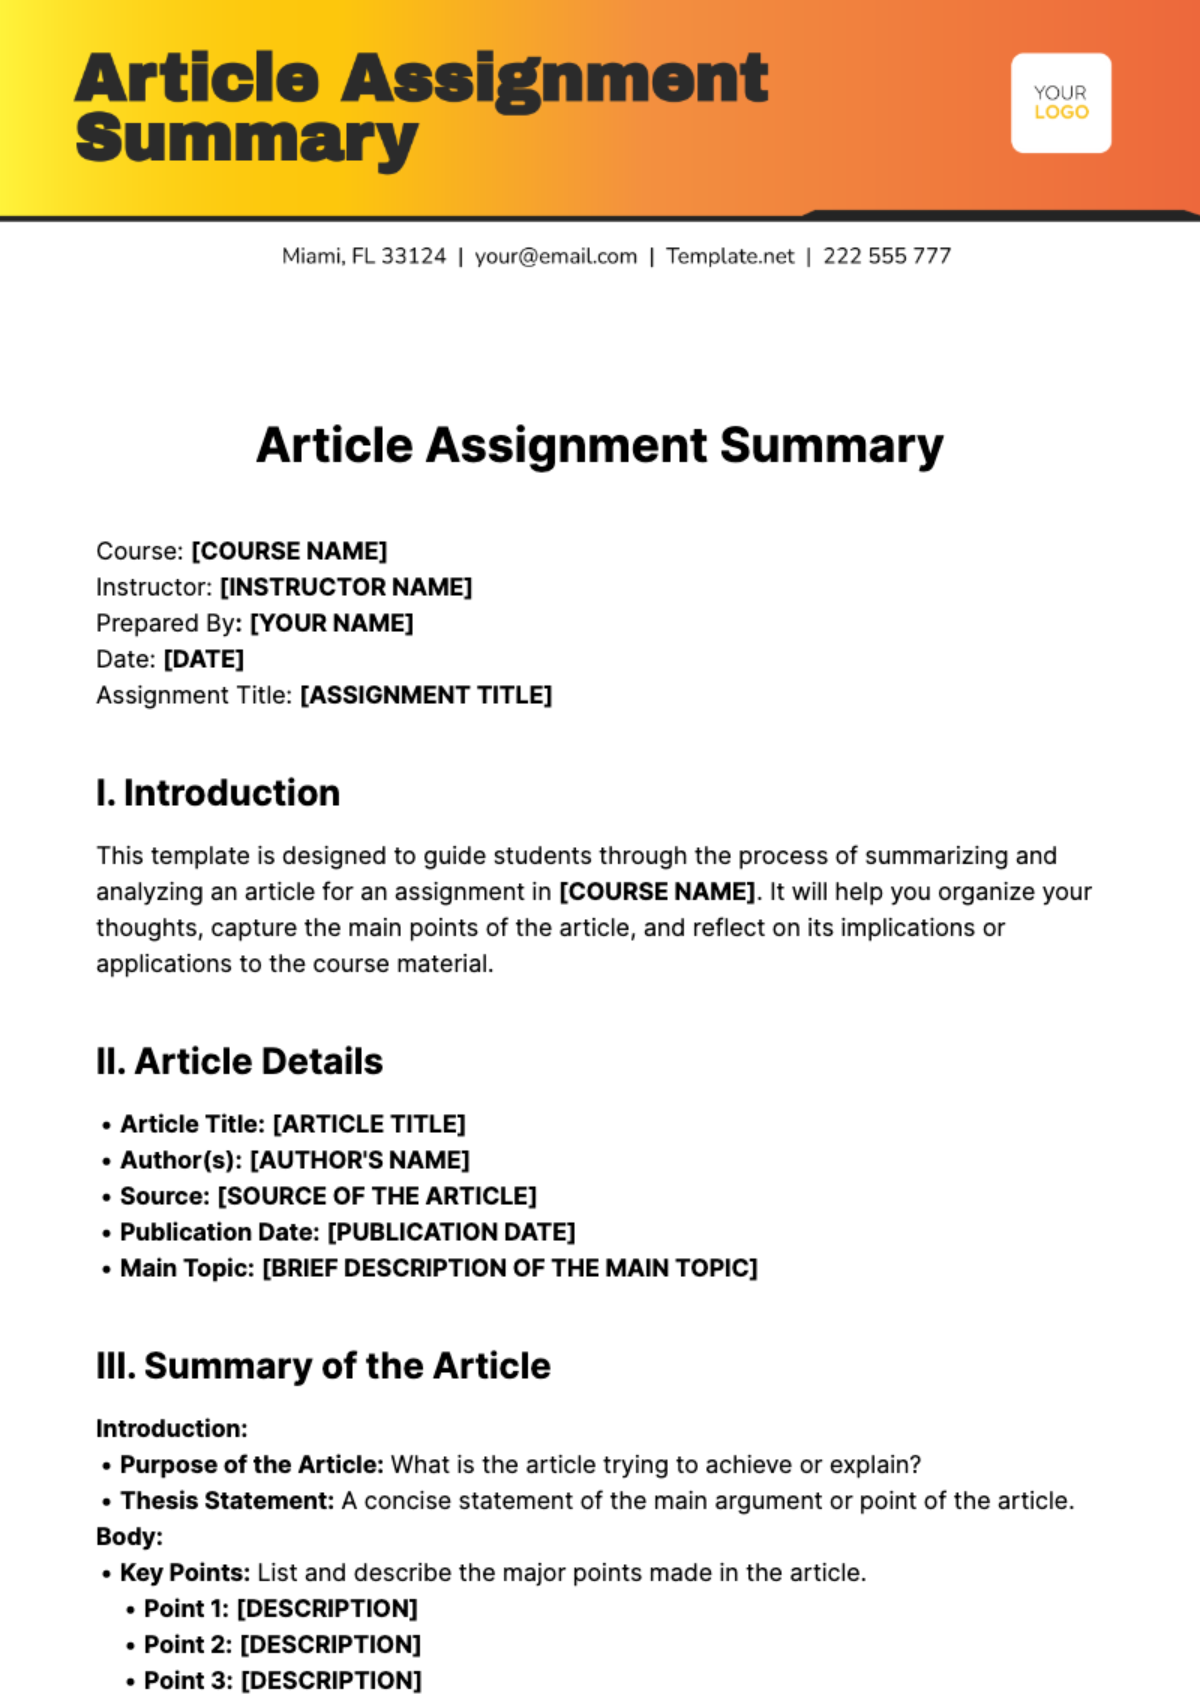 Free Article Assignment Summary Template